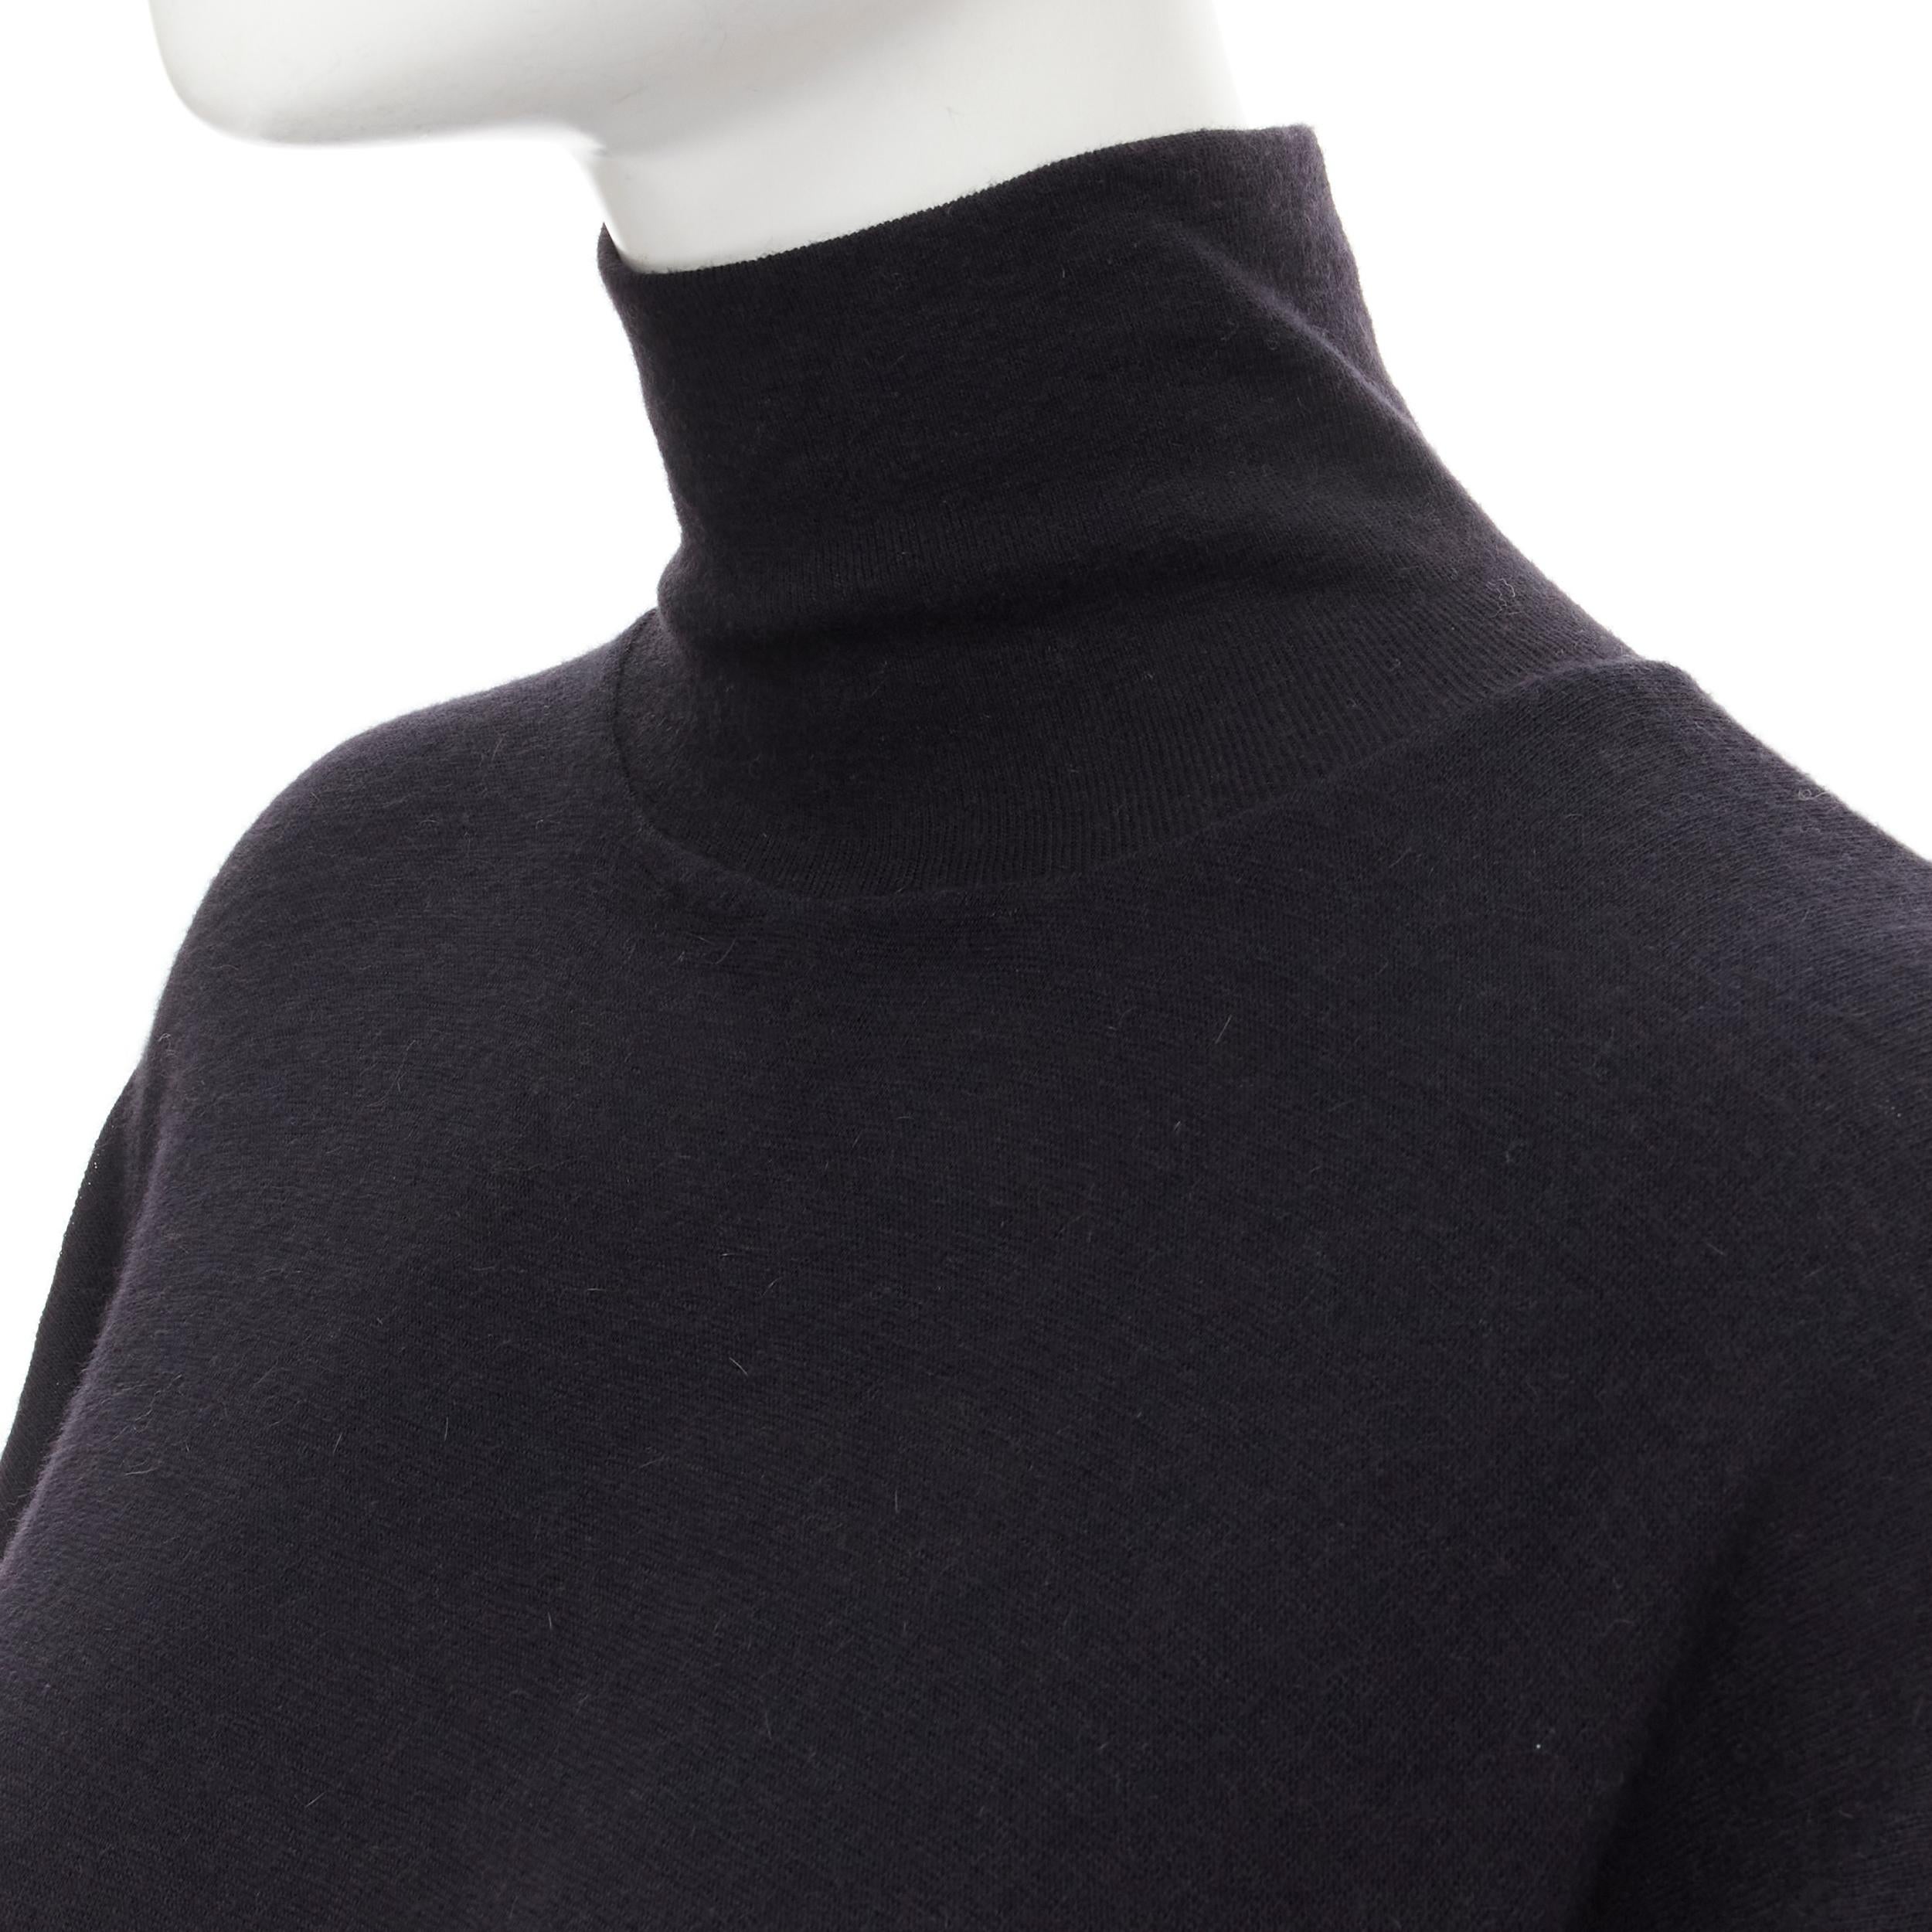 RICK OWENS LILIES black knit dolman sleeve turtleneck sweater IT42 M 
Reference: MELK/A00043 
Brand: Rick Owens Lilies 
Color: Black 
Pattern: Solid 
Extra Detail: Turtleneck. Dolman sleeves. Looser fit. 
Made in: Italy 

CONDITION: 
Condition: